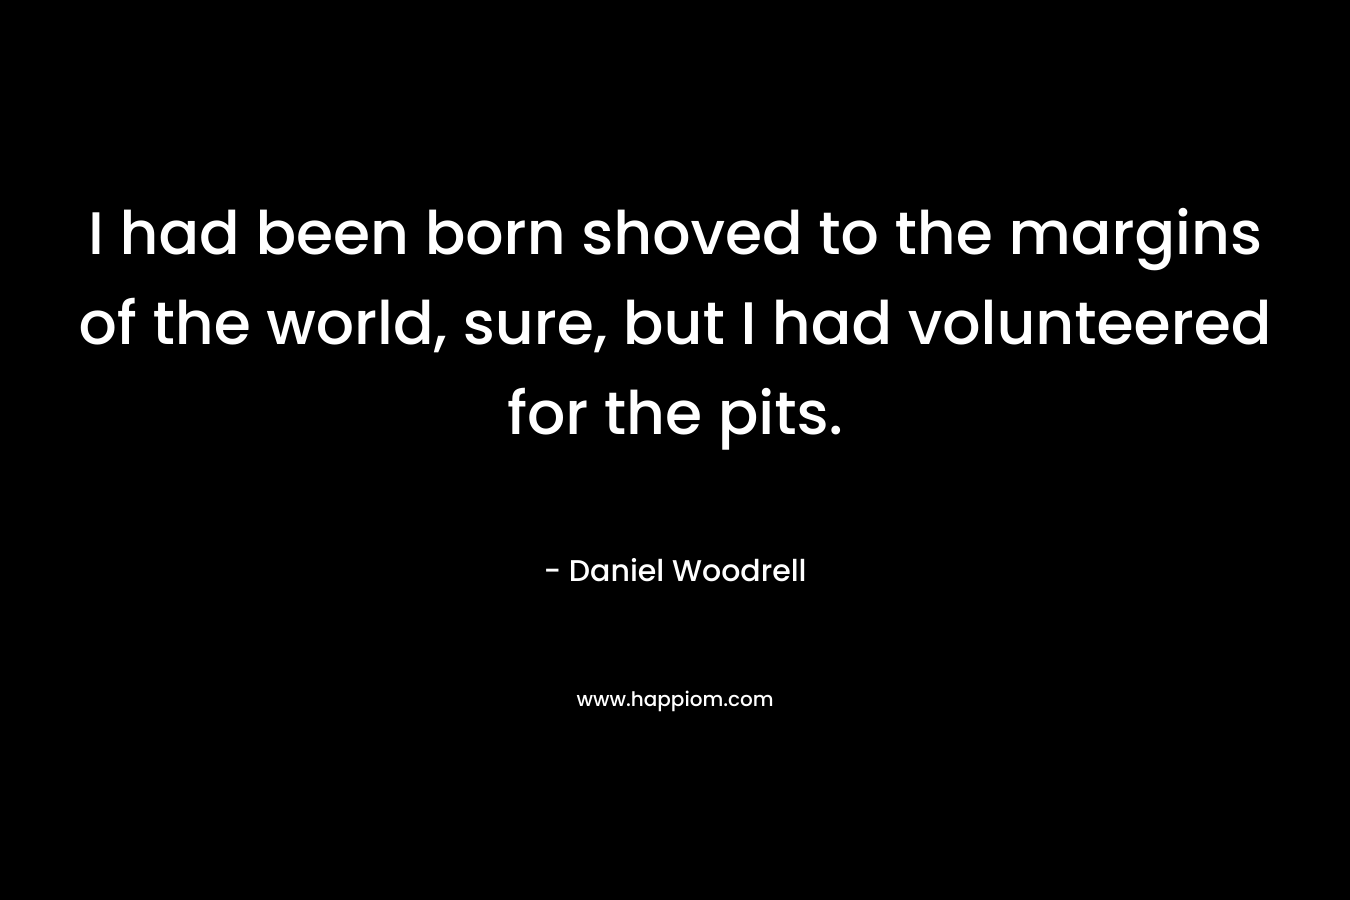 I had been born shoved to the margins of the world, sure, but I had volunteered for the pits. – Daniel Woodrell